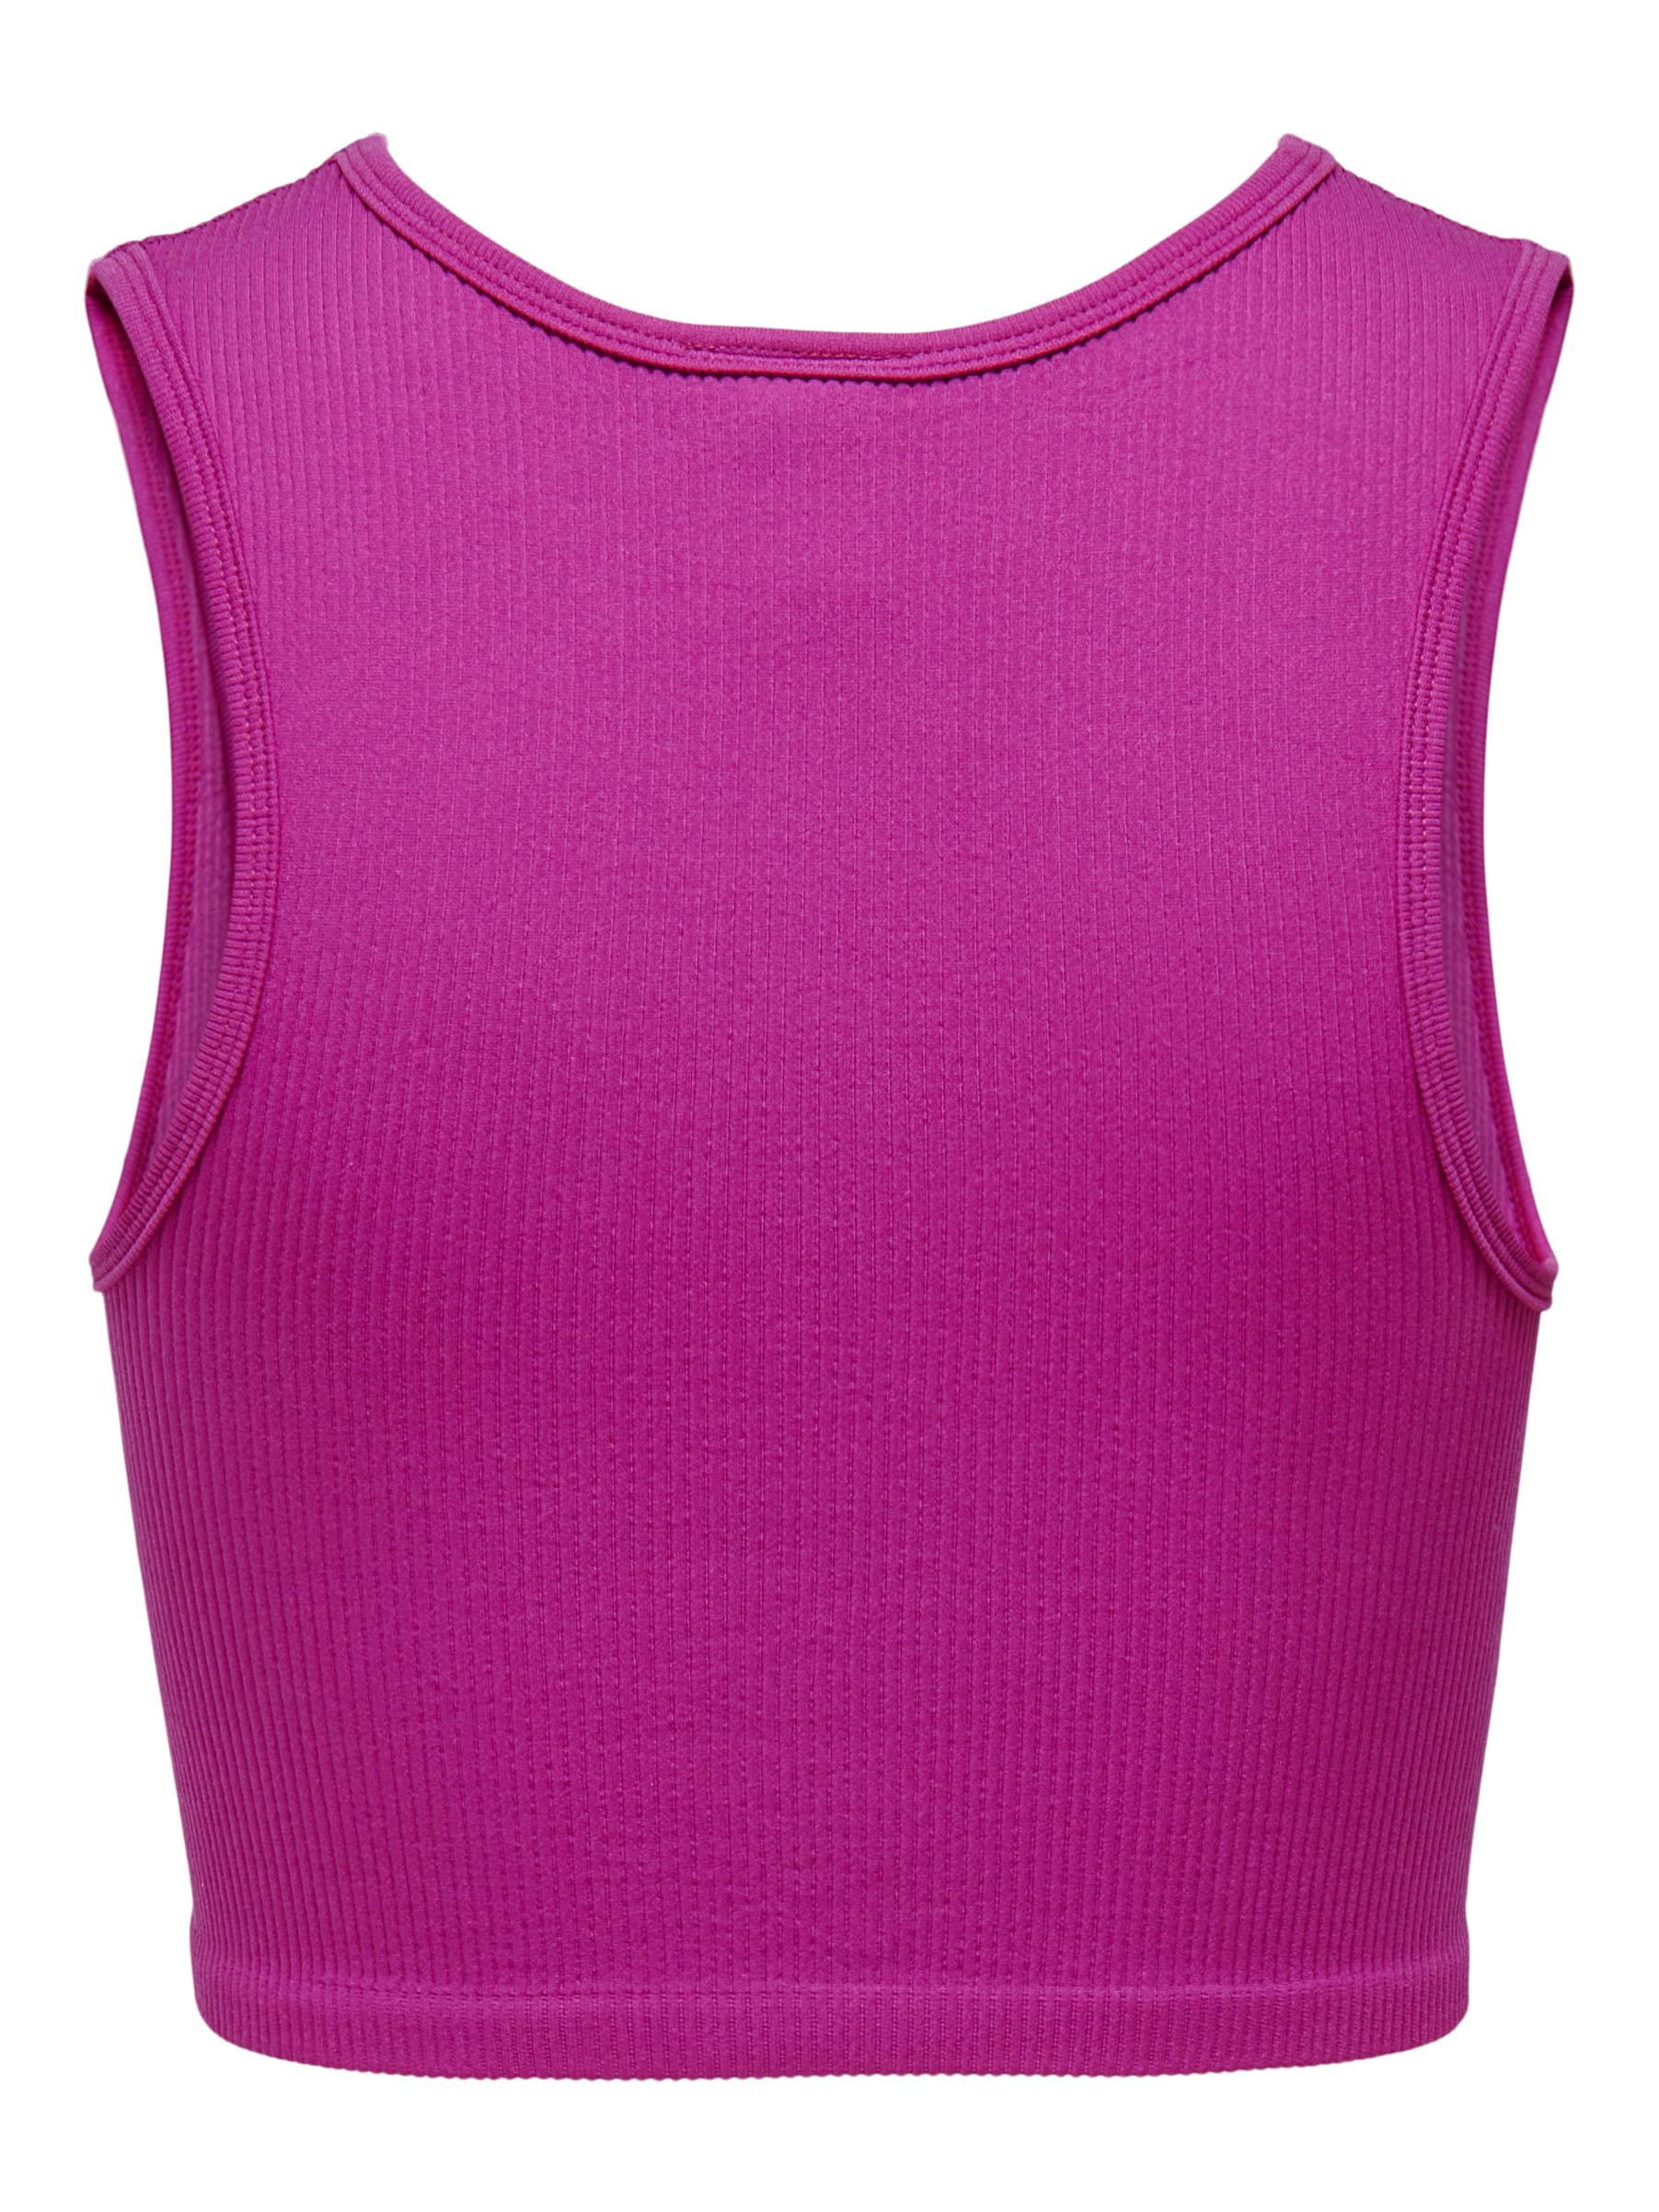 Only - Top stretch fit, Rosa peonia, large image number 1